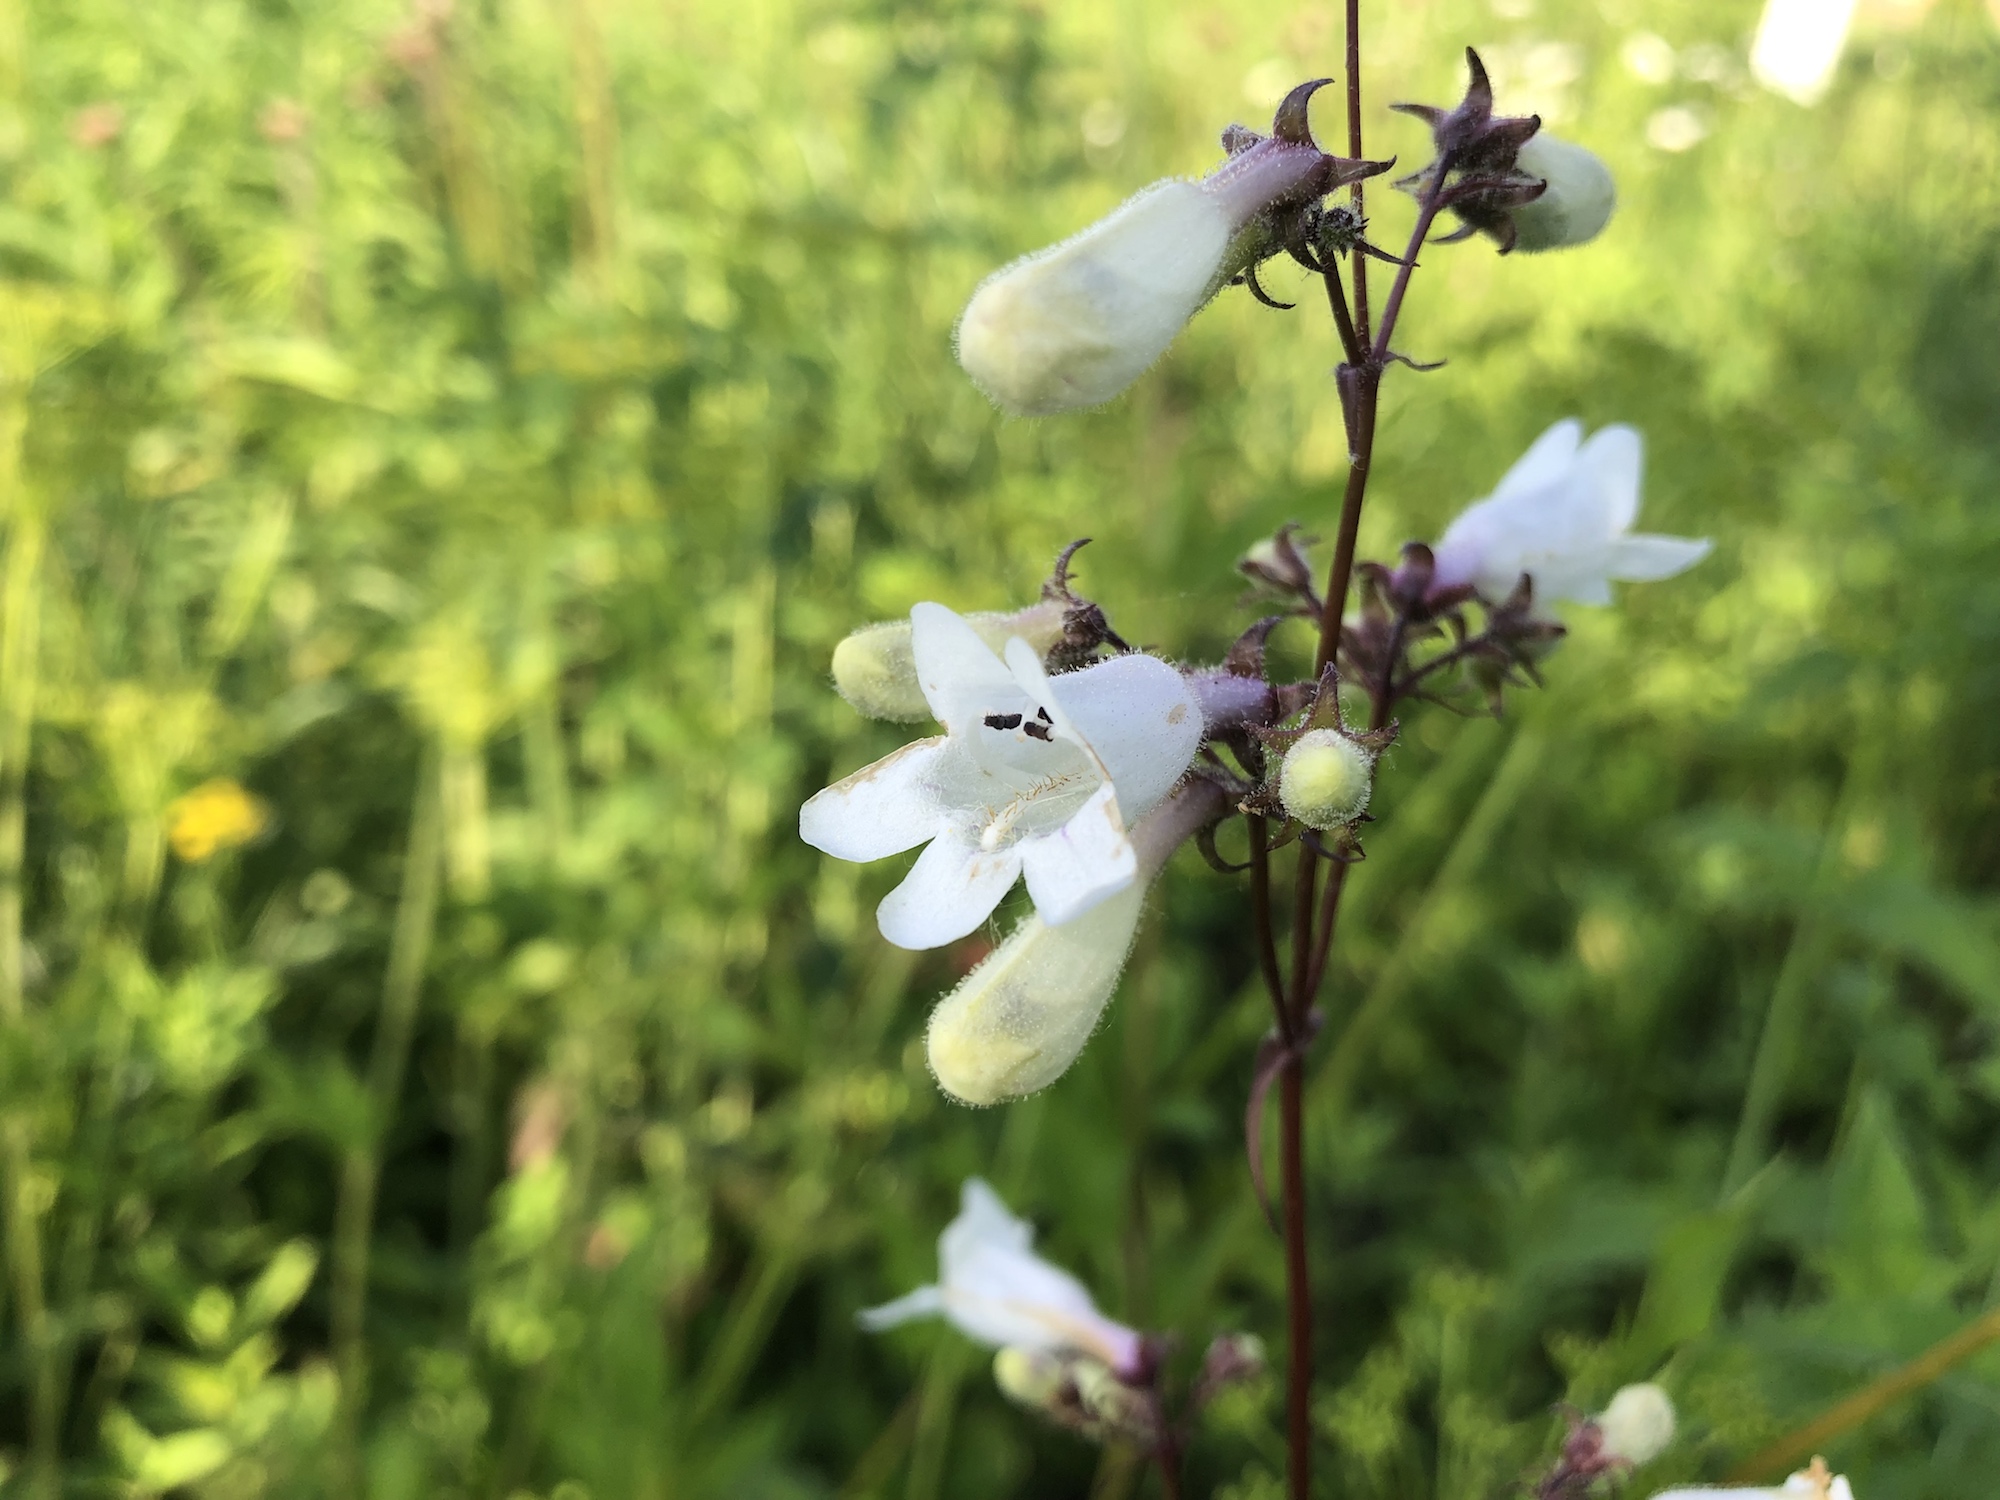 Foxglove Beardtongue on the banks of the retaining pond on June 15, 2019.